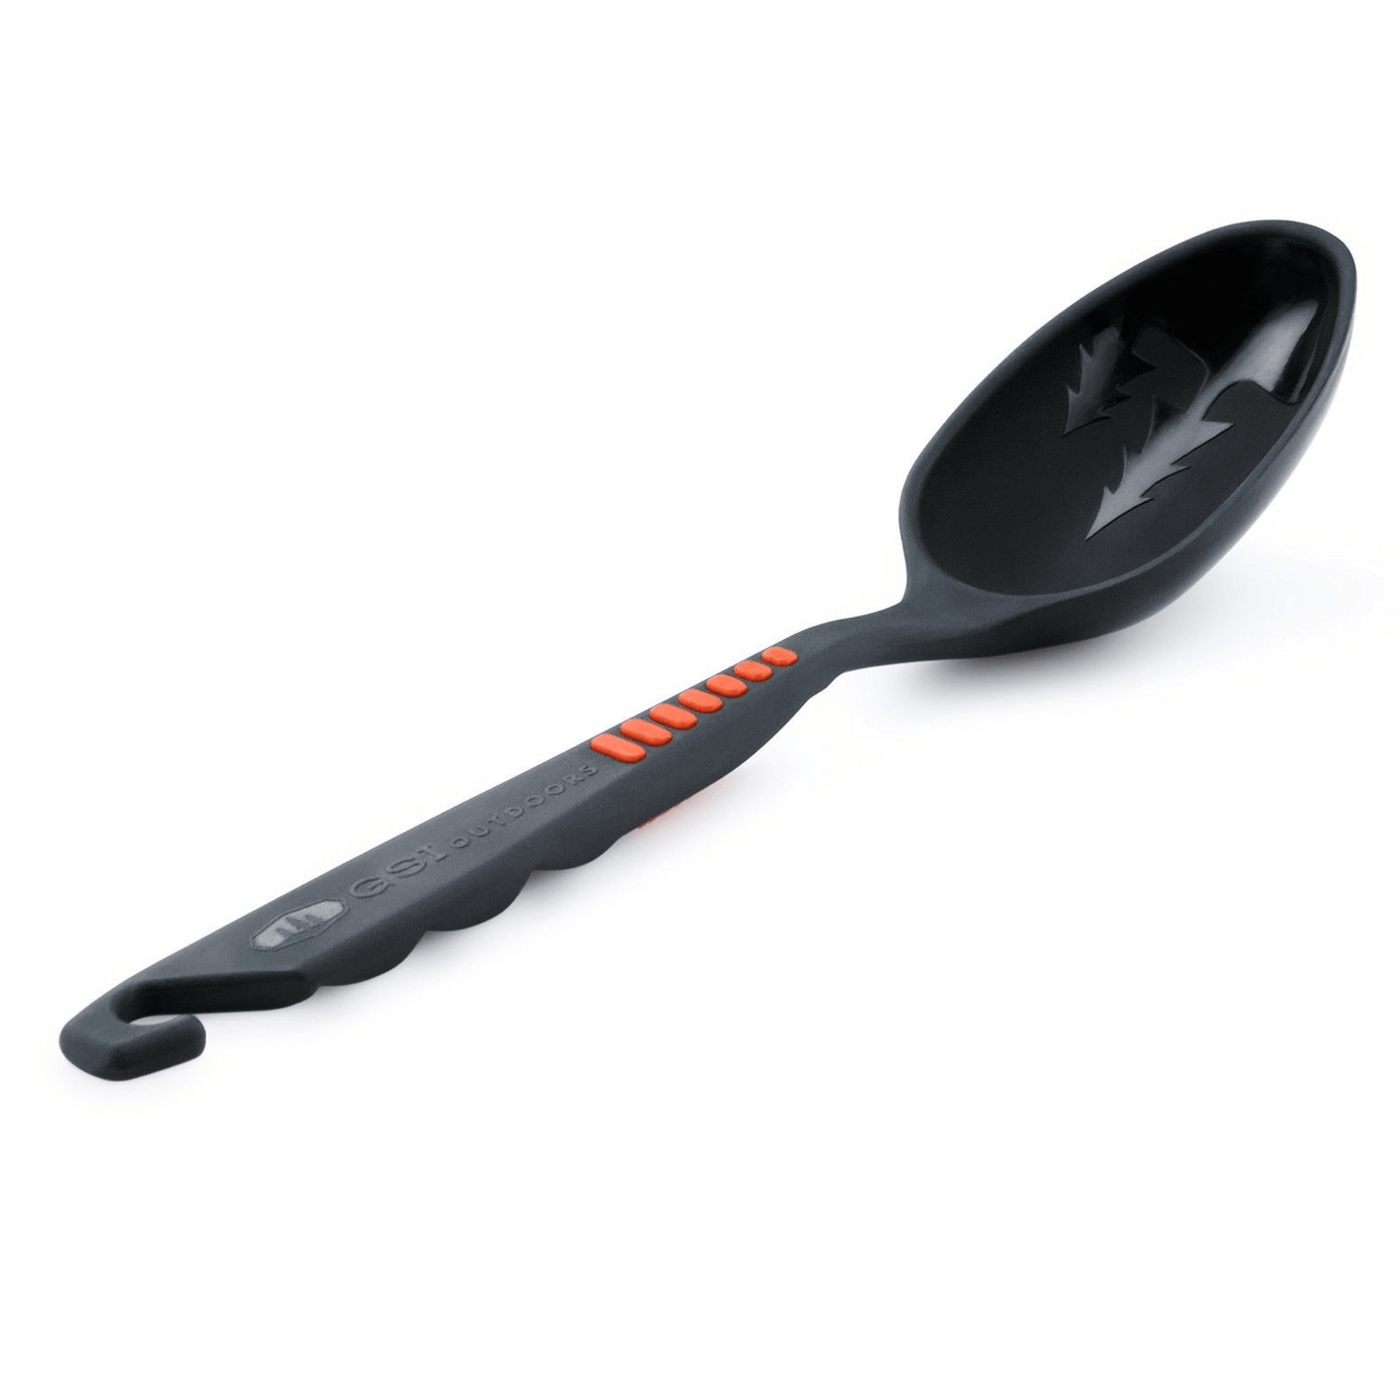 GSI Pack Spoon | GSI Camp Kitchen Cooking Utensils | Further Faster Christchurch NZ